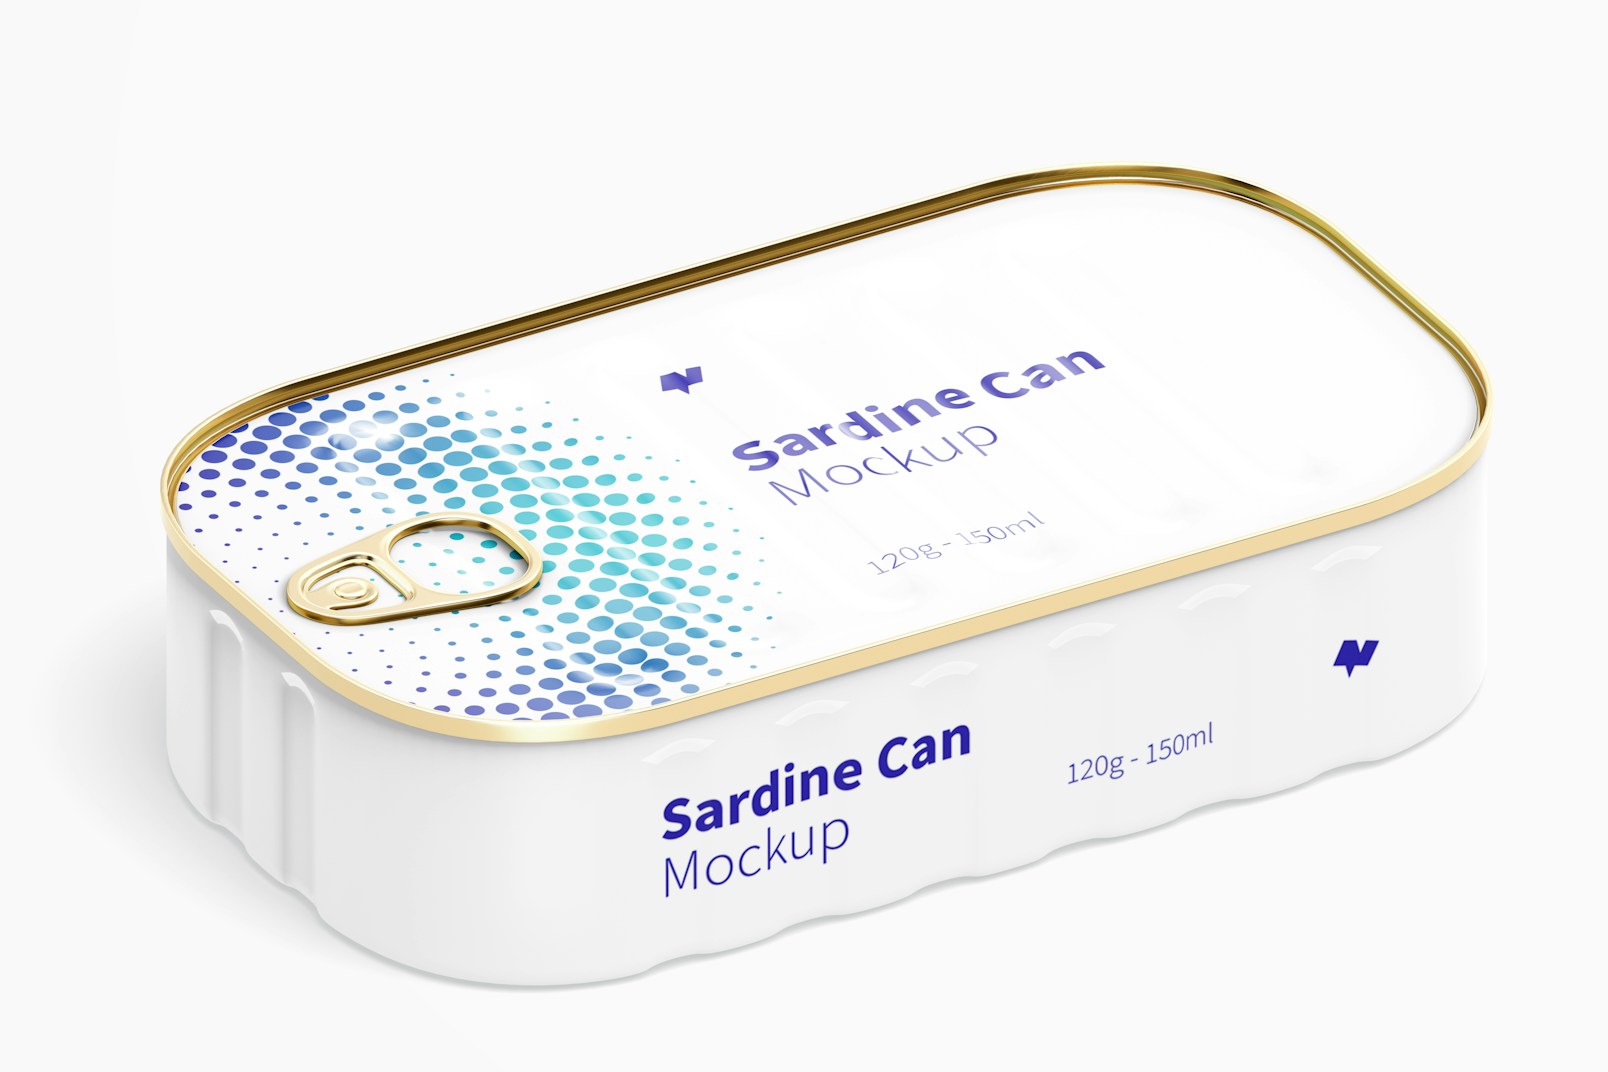 120g Sardine Can Mockup, Isometric Right View